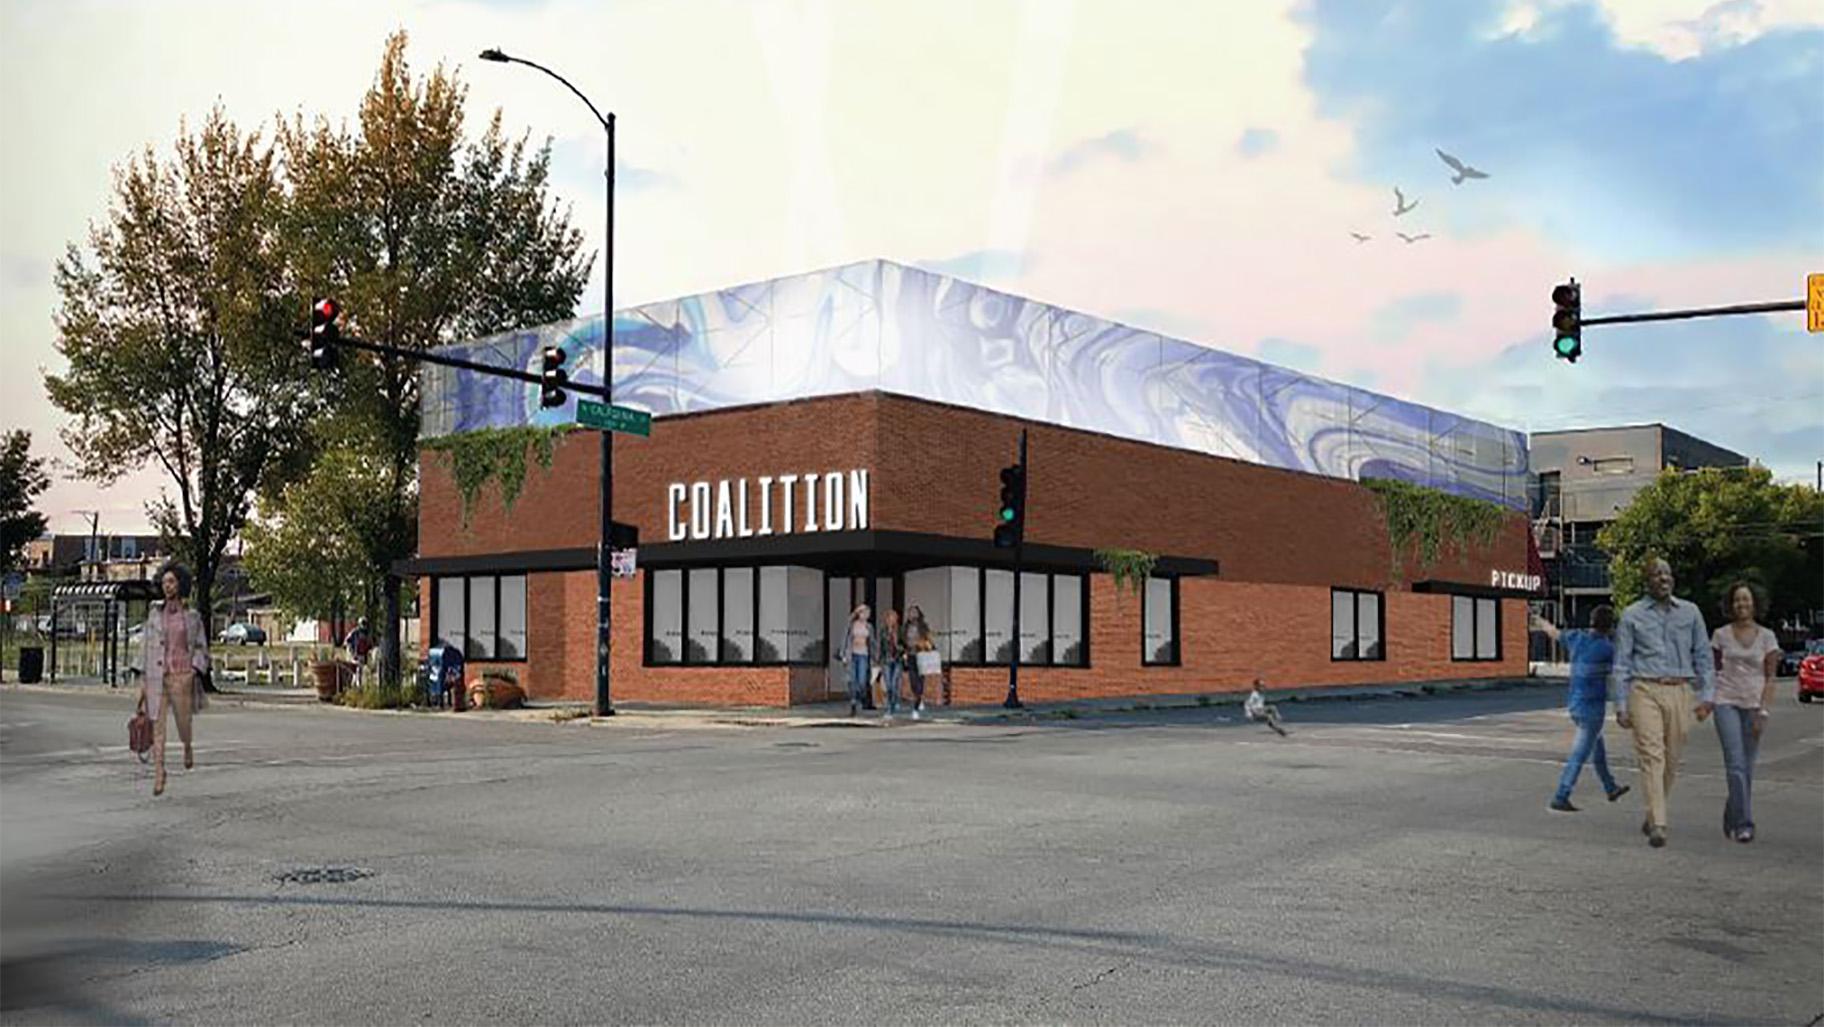 Coalition Food Hall, set to be located near the California Green Line Station in Garfield Park, is one of 11 equitable transit-oriented developments that received a grant this week.  (Credit: Coalition Food Hall)